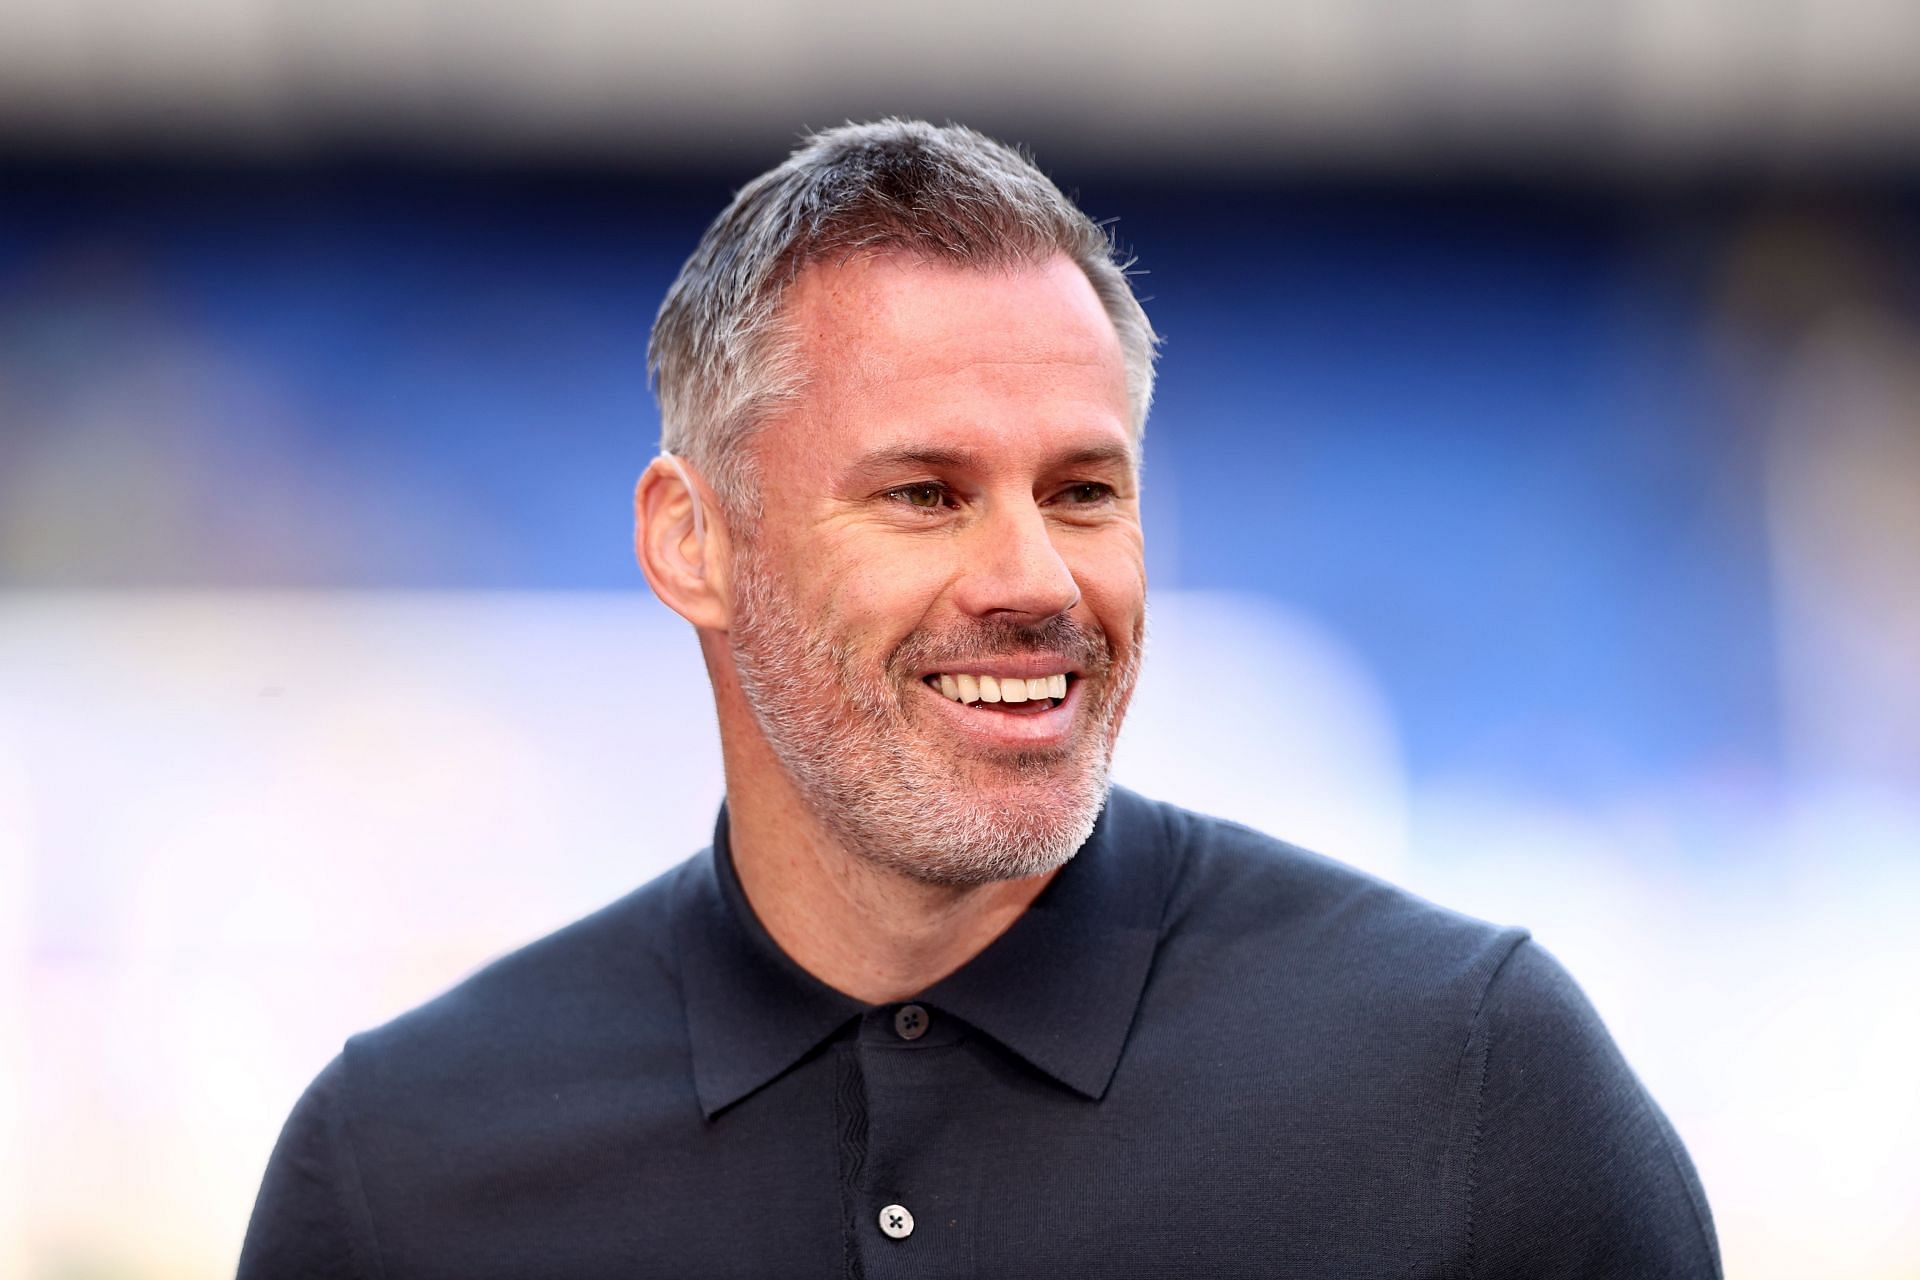 Carragher has stated that the Reds should enter the window for a defender as well.